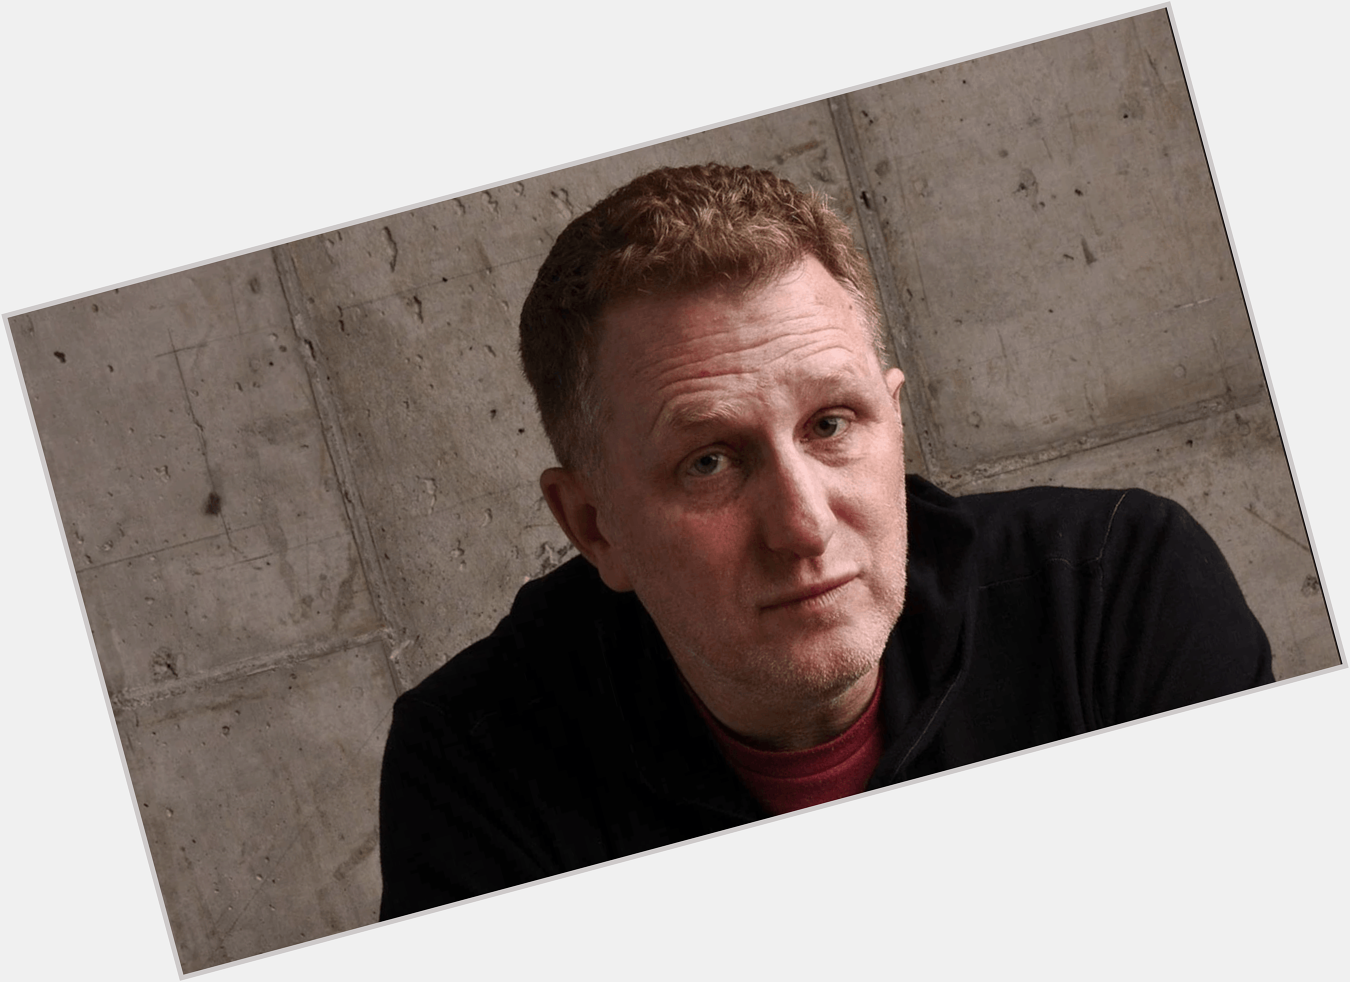 Happy 50th birthday to Michael Rapaport, star of DEEP BLUE SEA, THE 6TH DAY, KISS OF THE DAMNED, and more! 